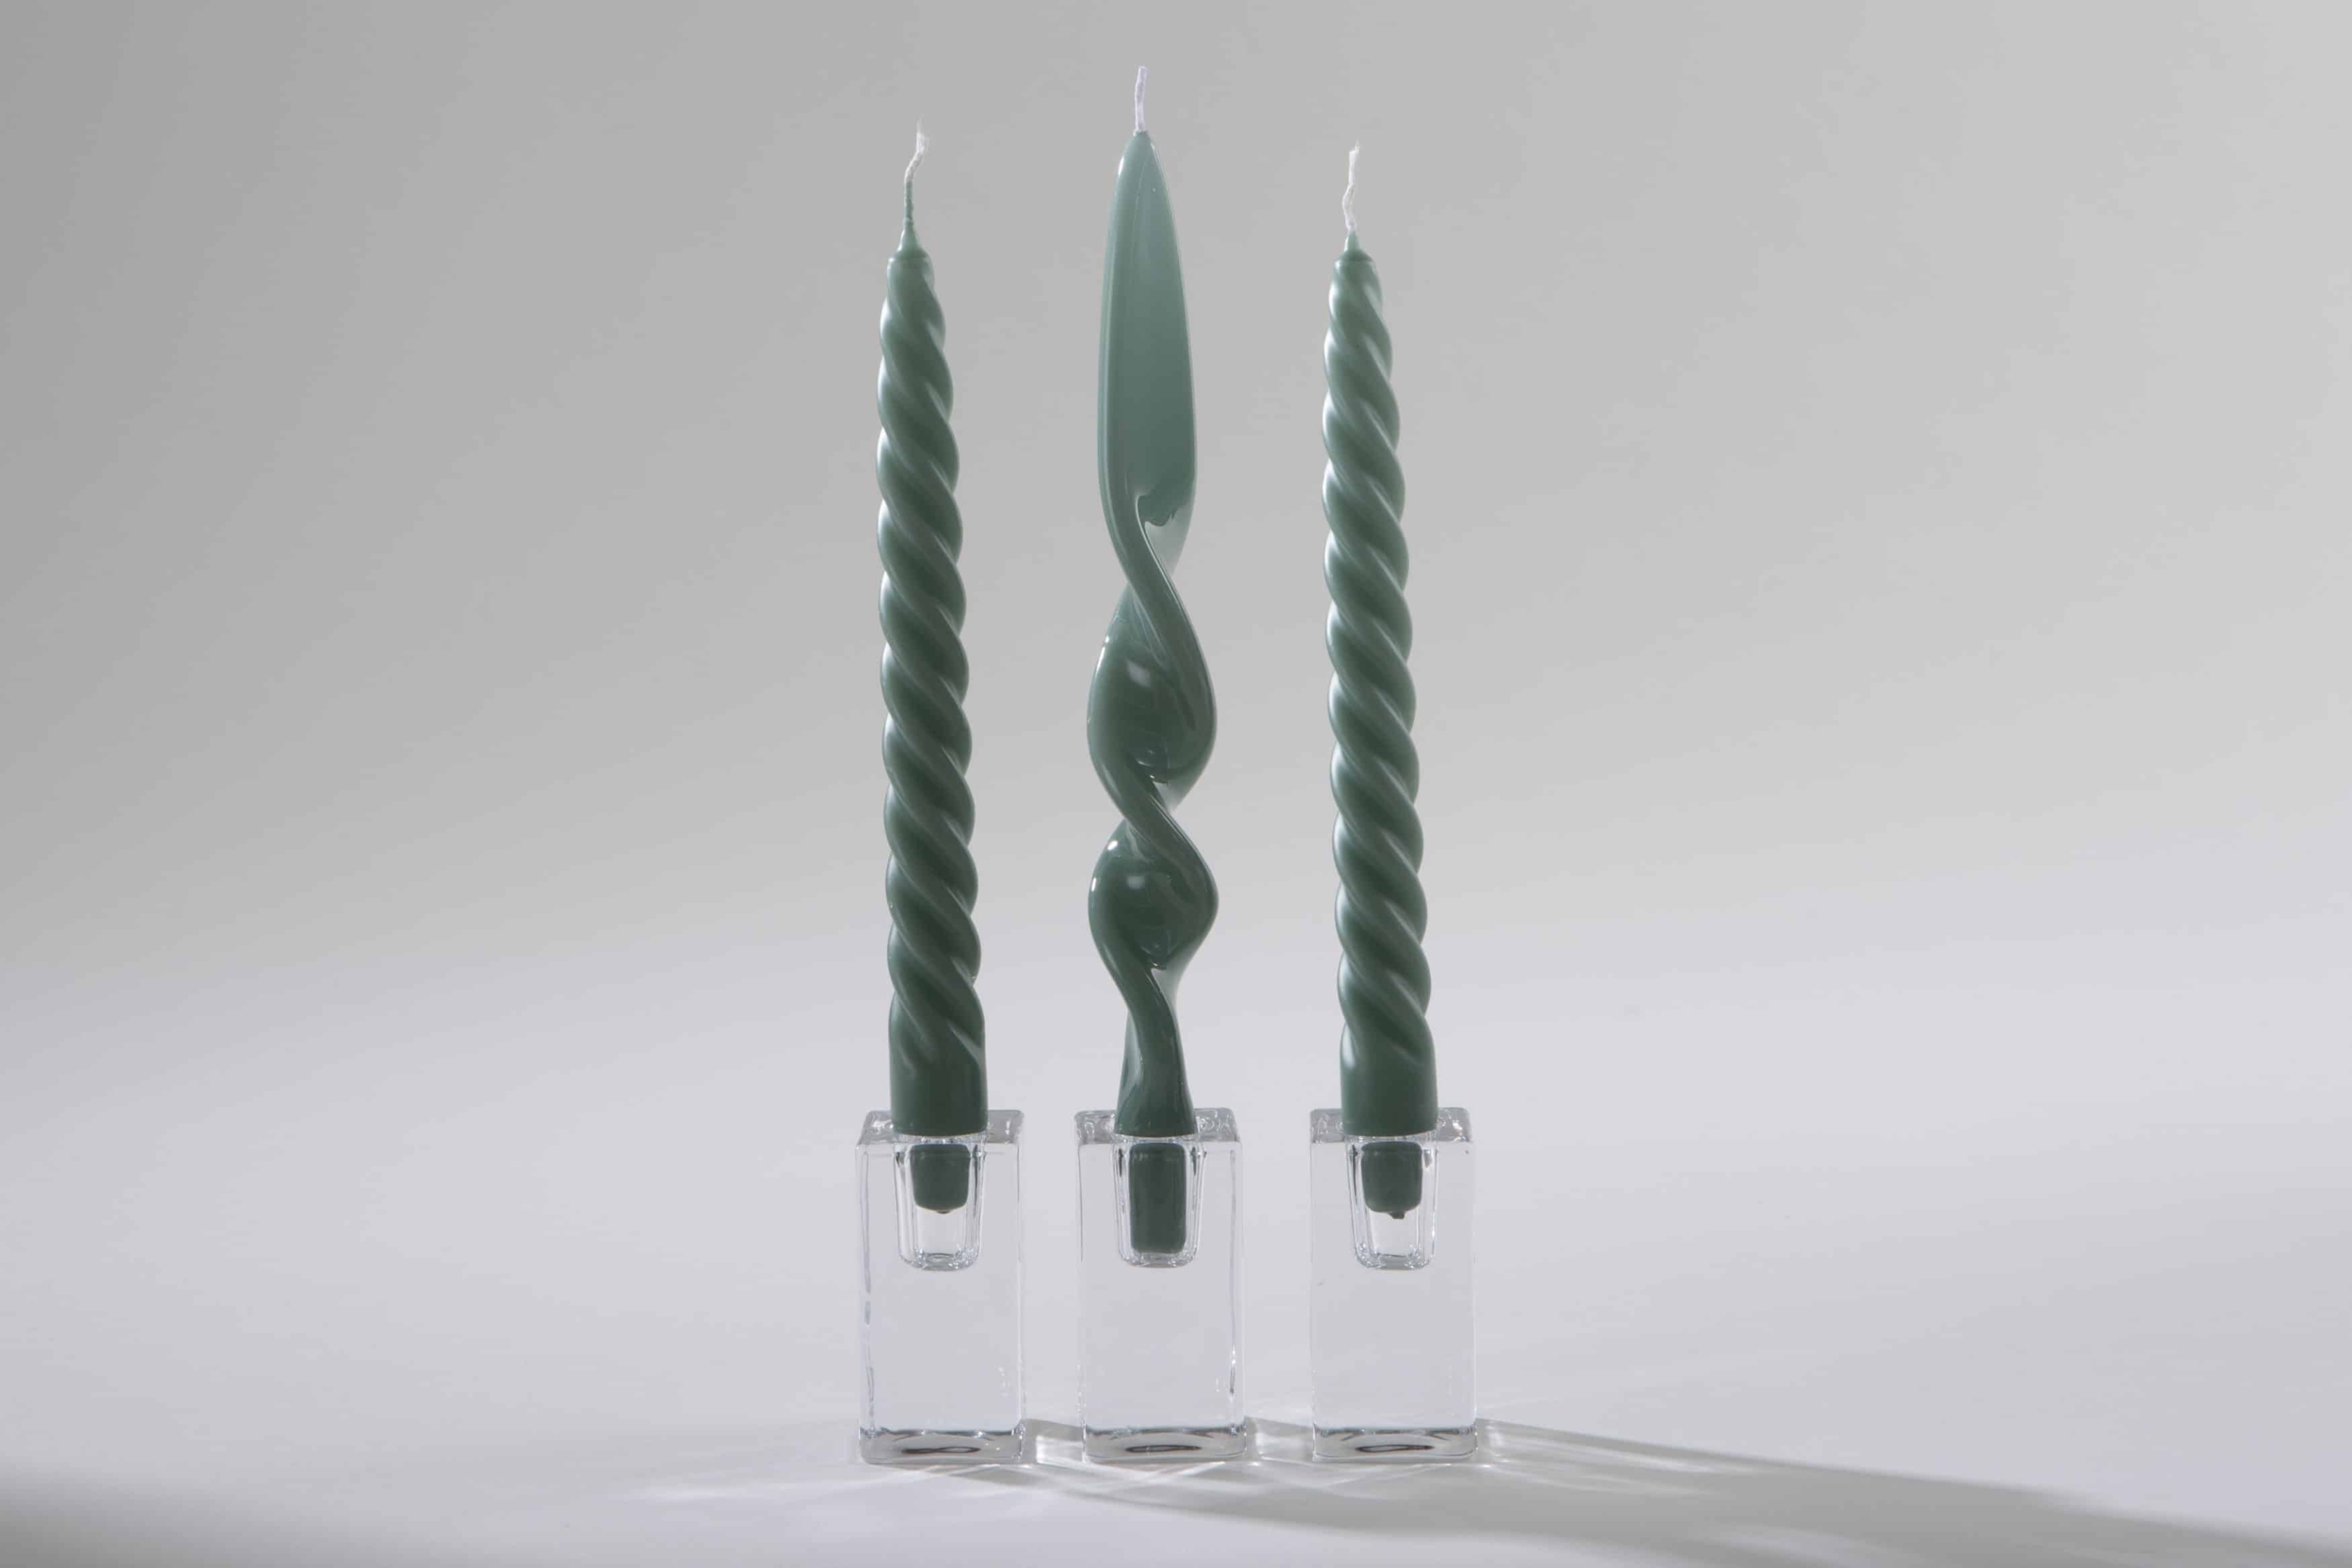  | This twisted candle in matte Teal attracts all eyes with its minimalist, twisted design. Somehow, it is more than just a candle, almost a small object of art that not only looks great on the table but also as an eye-catcher on sideboards or bar trolleys.Our spiral candles are carefully made by hand in a traditional manufactory in Italy. Each candle is 28 cm high. The softly shaped candles look particularly good in our “Baradero” candle holders made of clear glass.We exclusively offer candle... | 